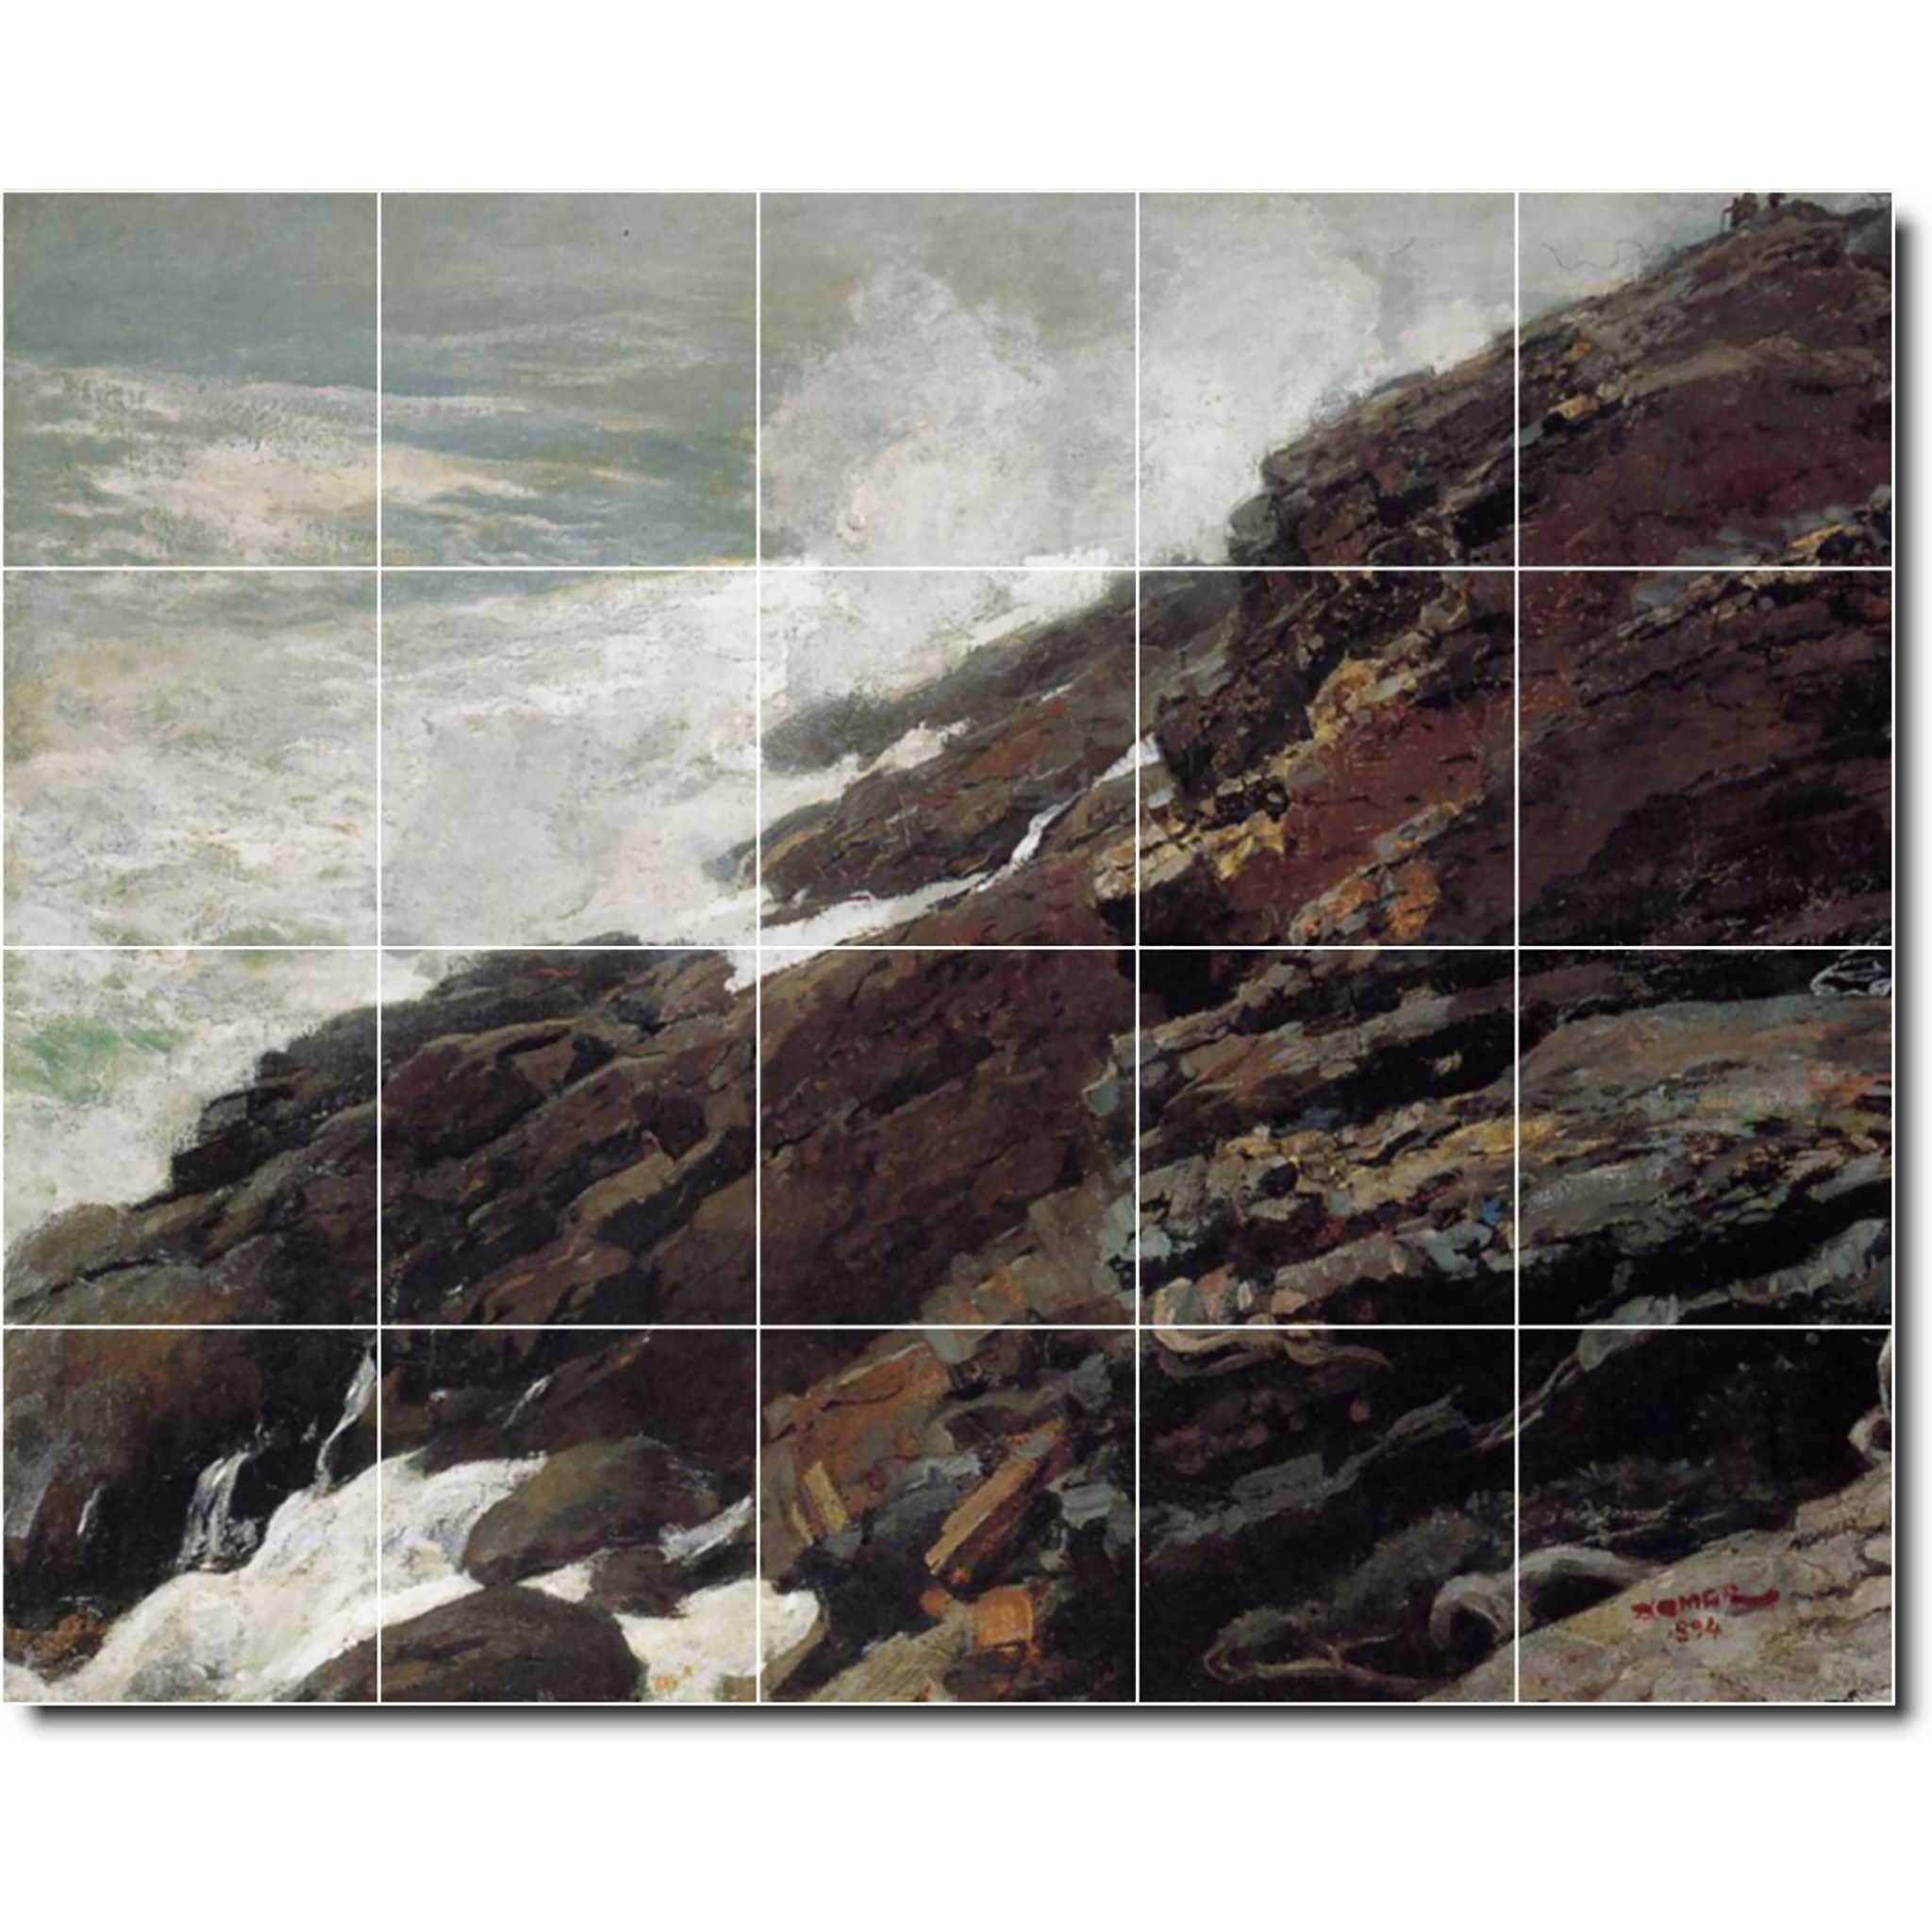 Winslow Homer Waterfront Painting Ceramic Tile Mural P04408-XL. 60"W x 48"H (20) 12x12 tiles